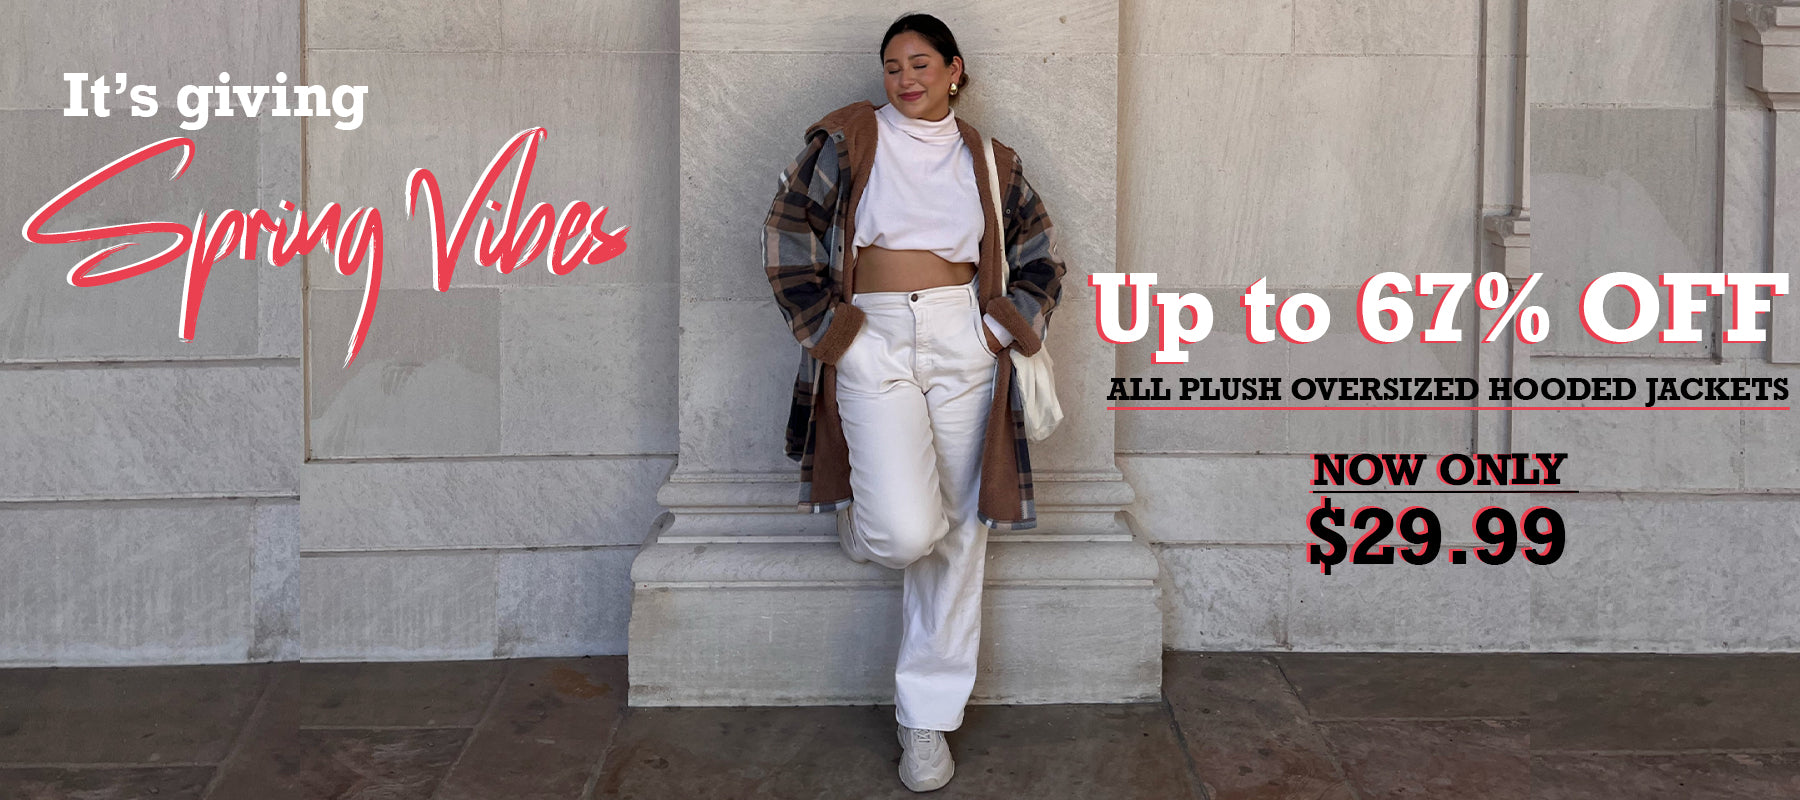 All oversized long plush jackets are now on sale at  $29.99.